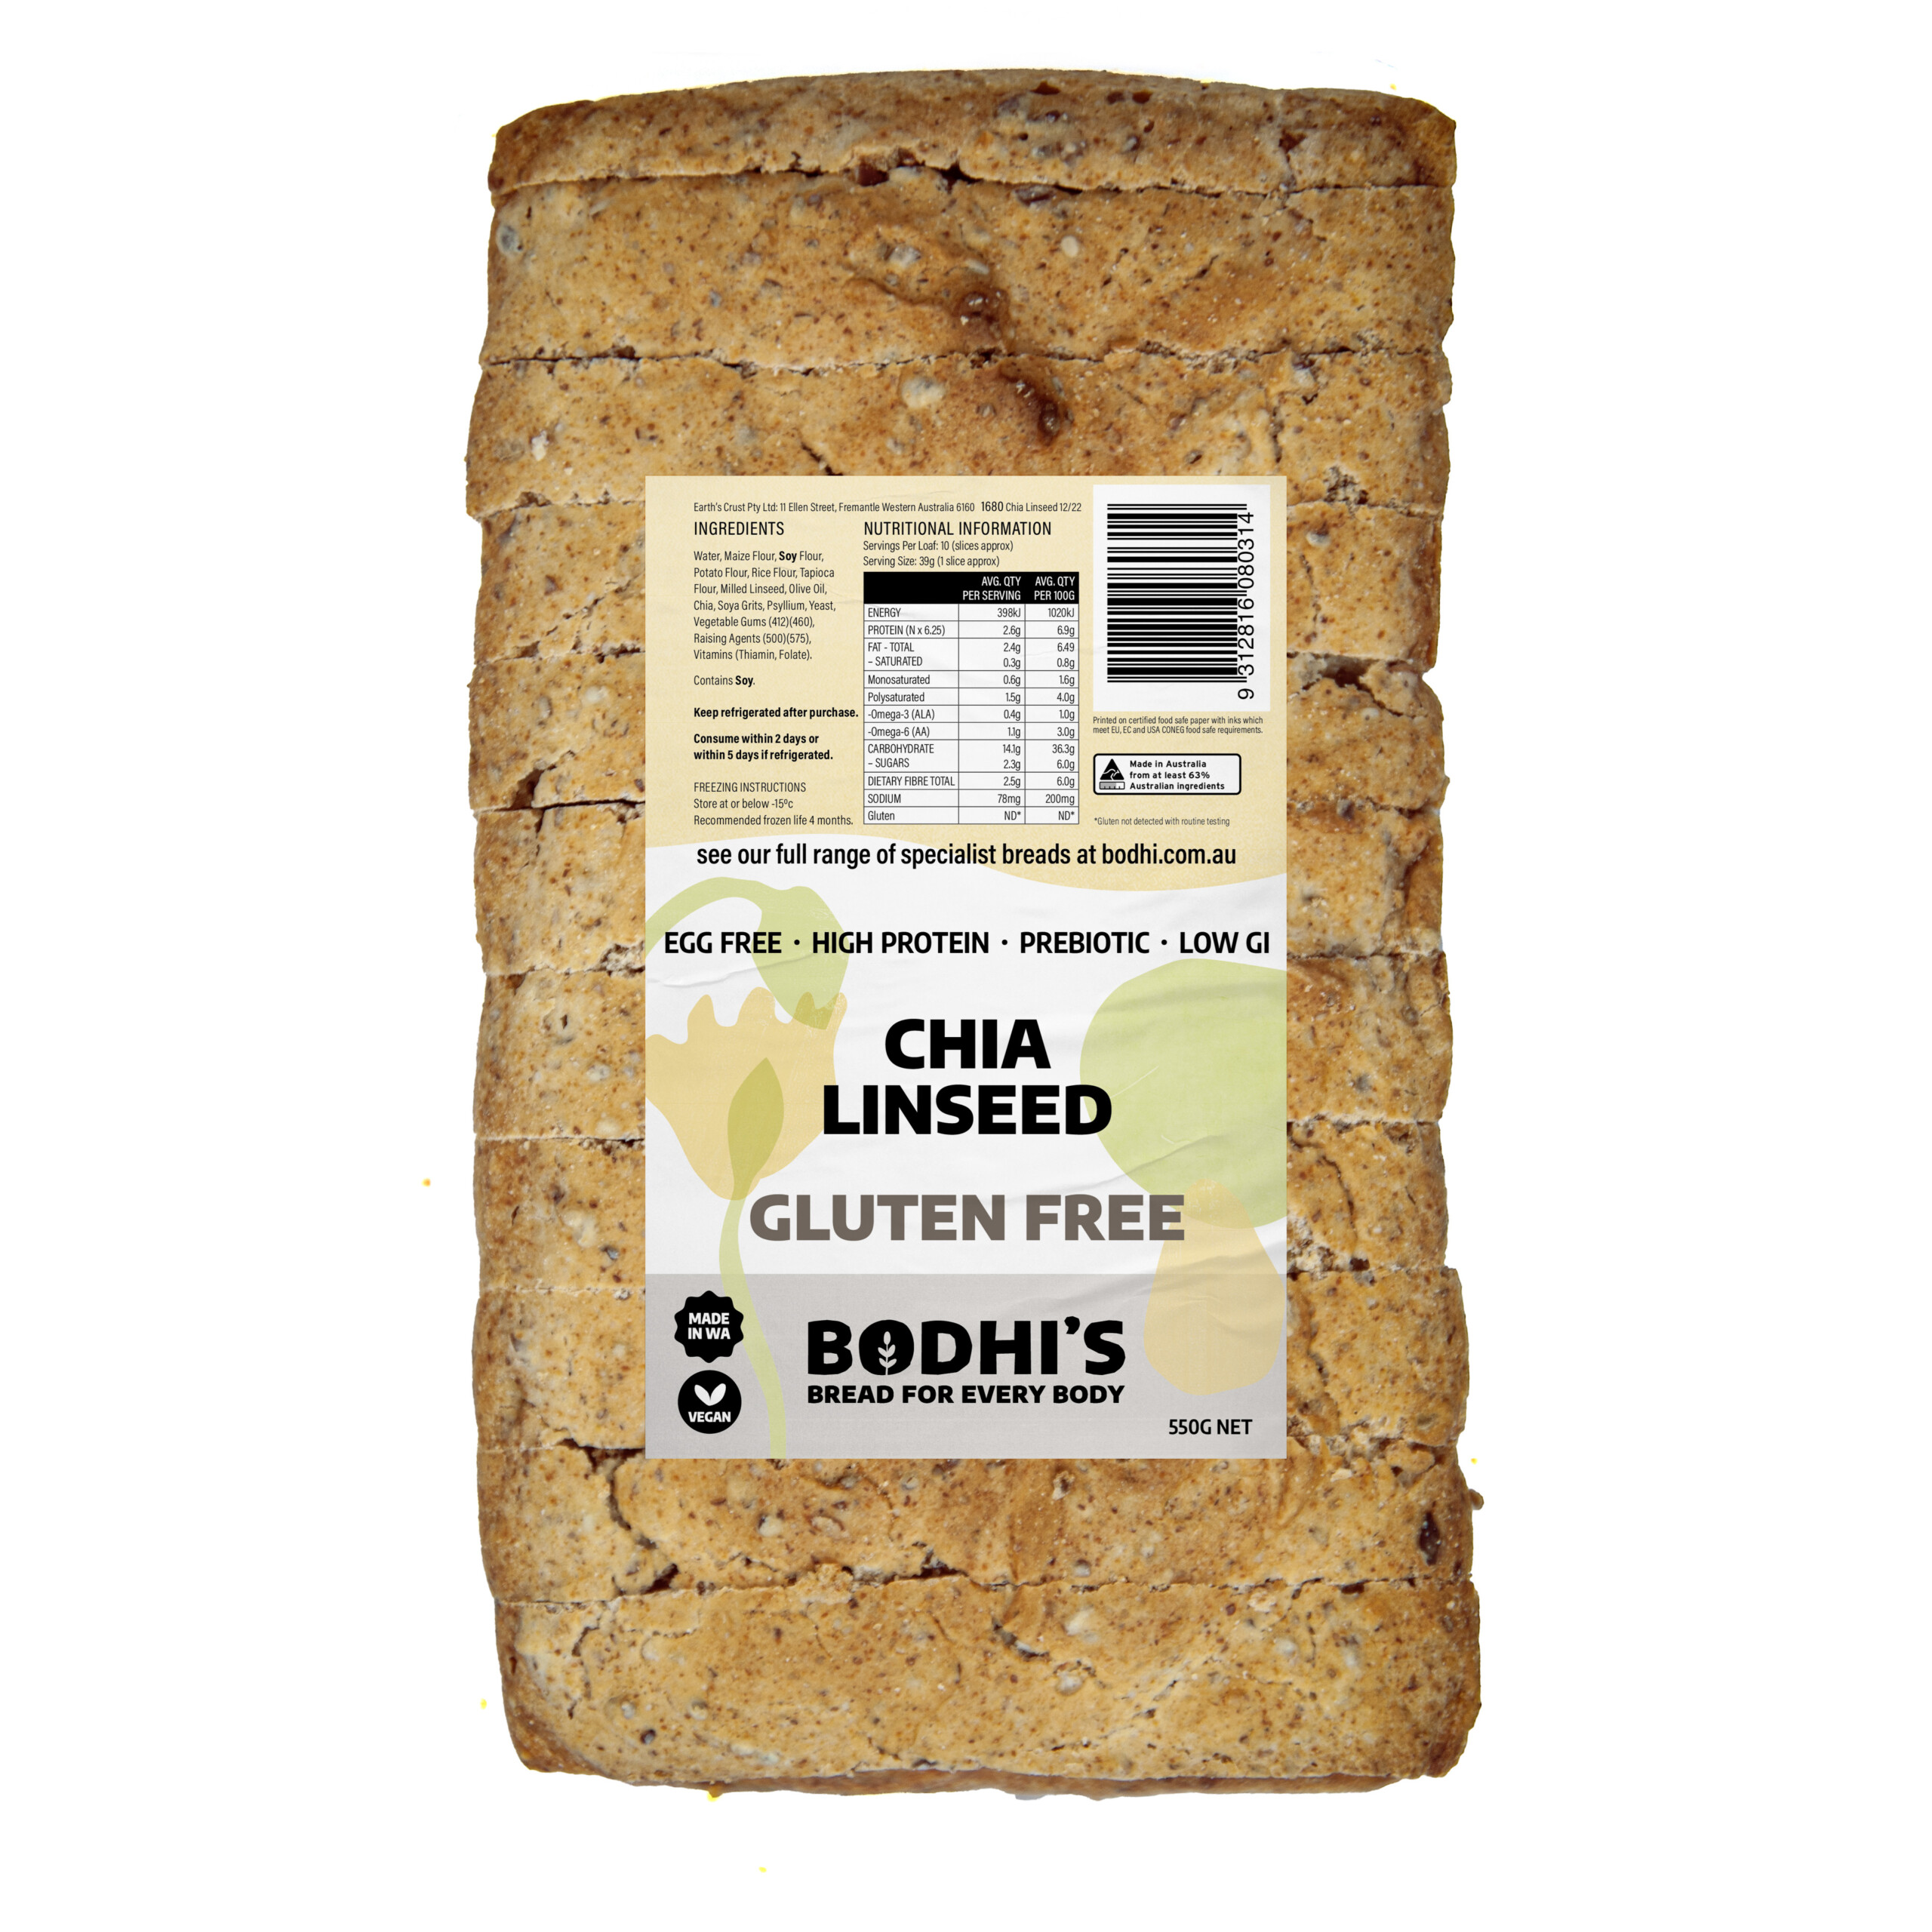 A photo of a sliced loaf of Bodhi's Gluten Free Chia Linseed Bread and its label